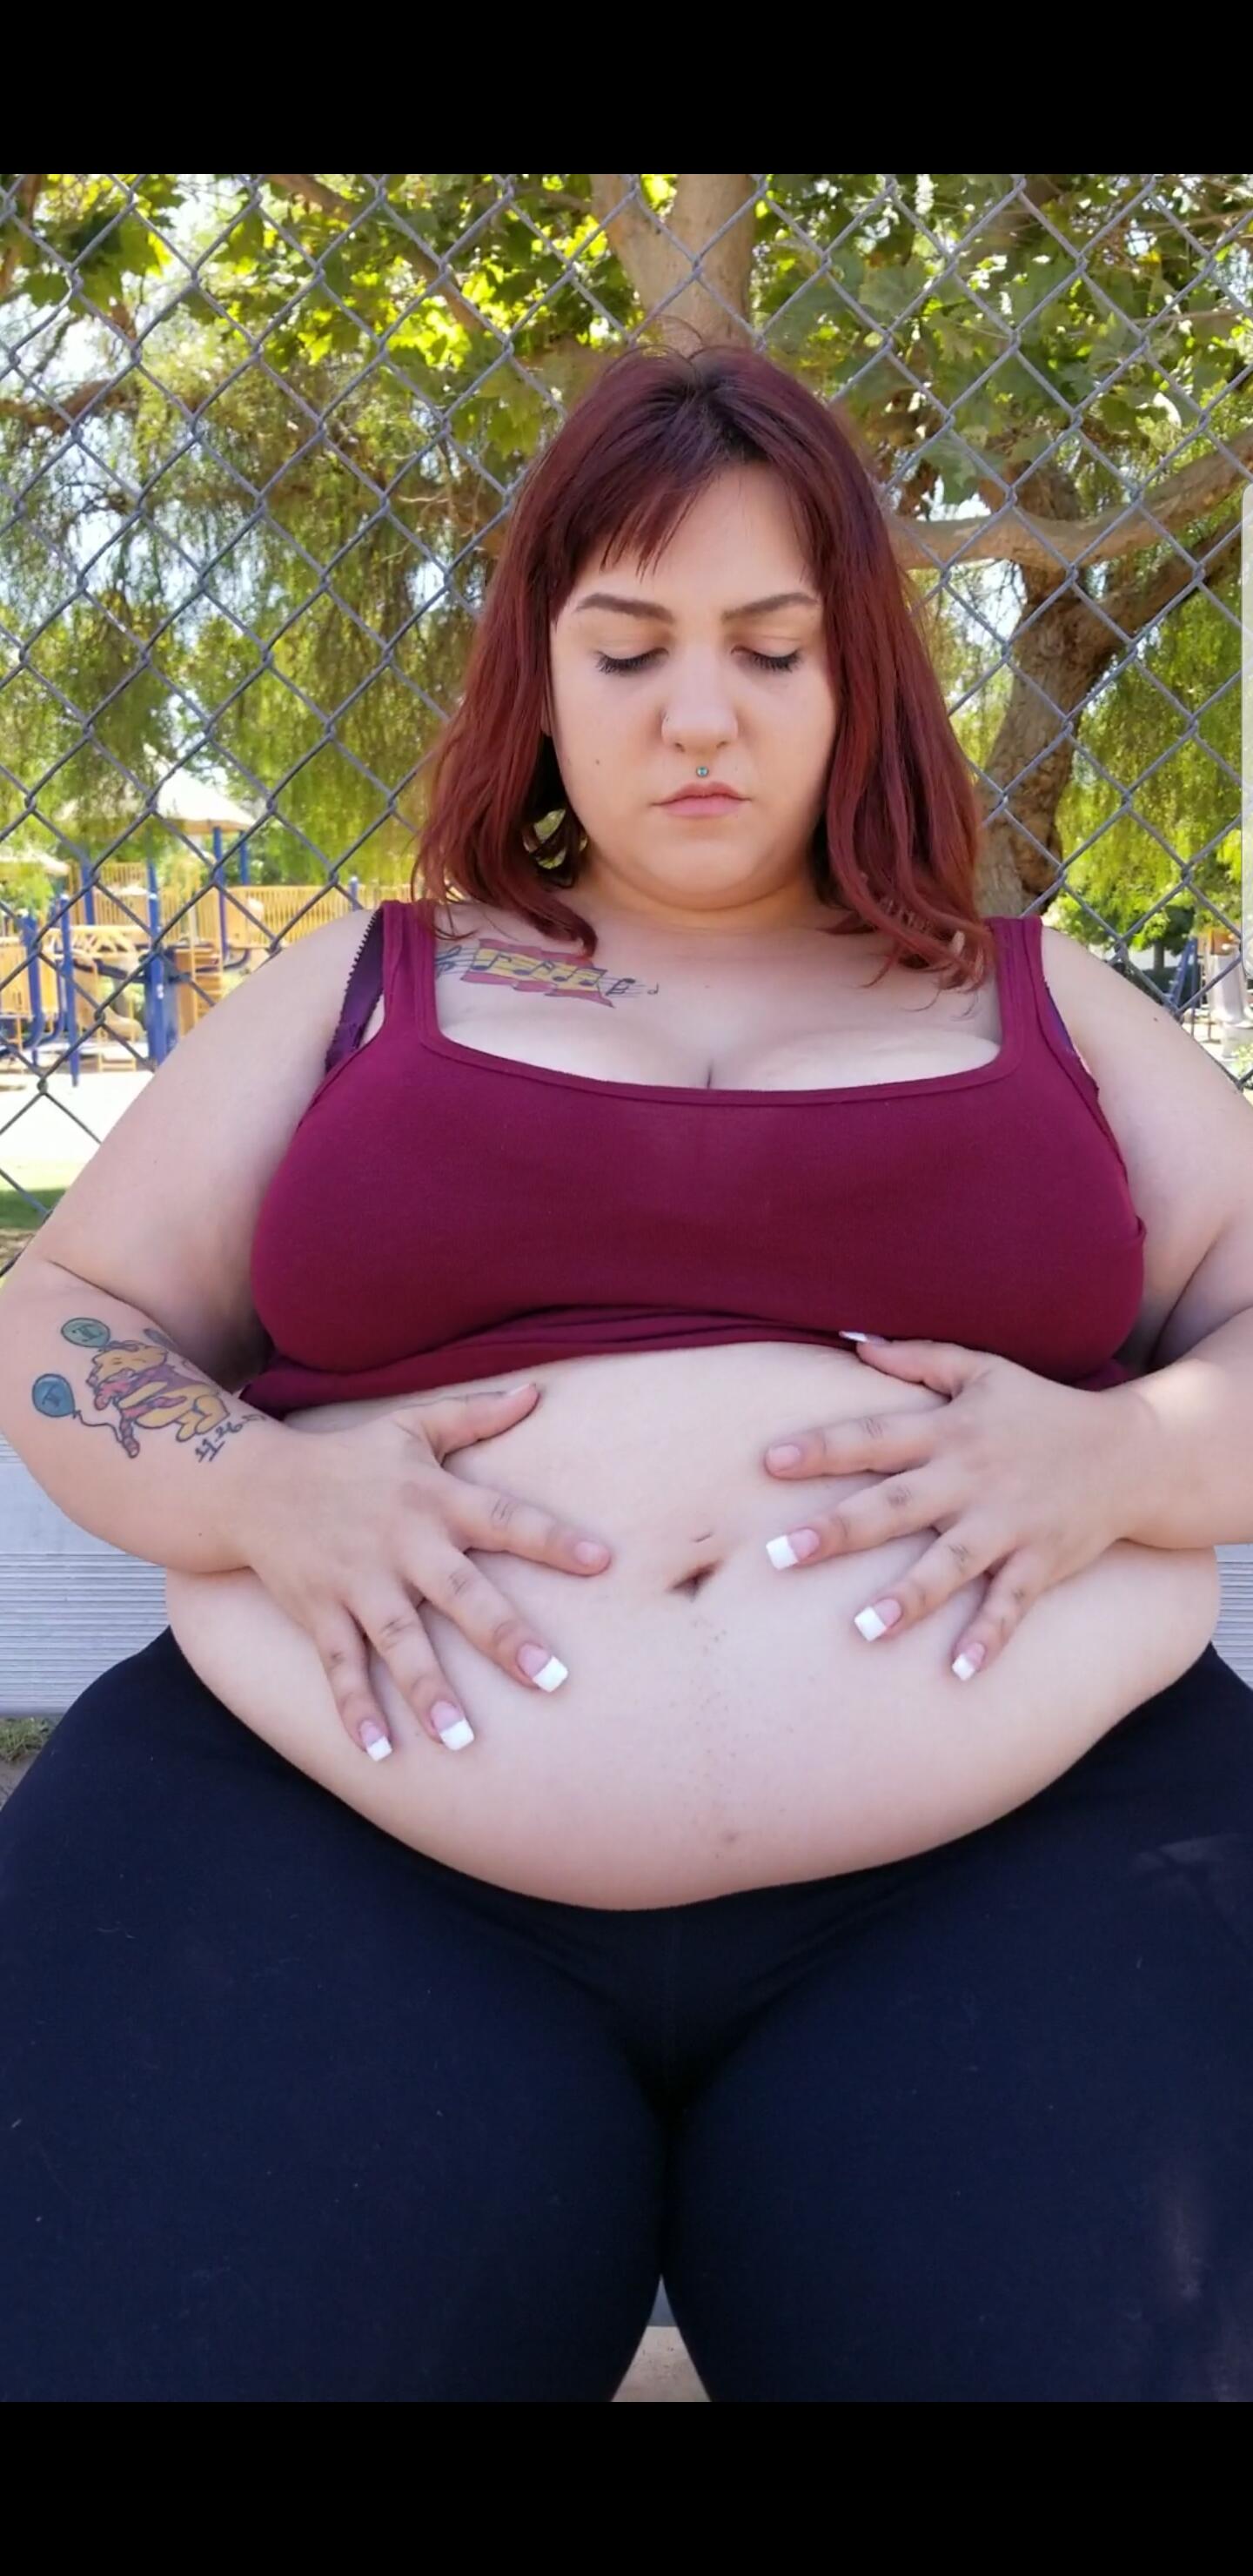 Big Belly Play Porn - Fat Bbw Girl Belly Play - Hot Sex Images, Best XXX Photos and Free Porn  Pics on www.pornbasic.com